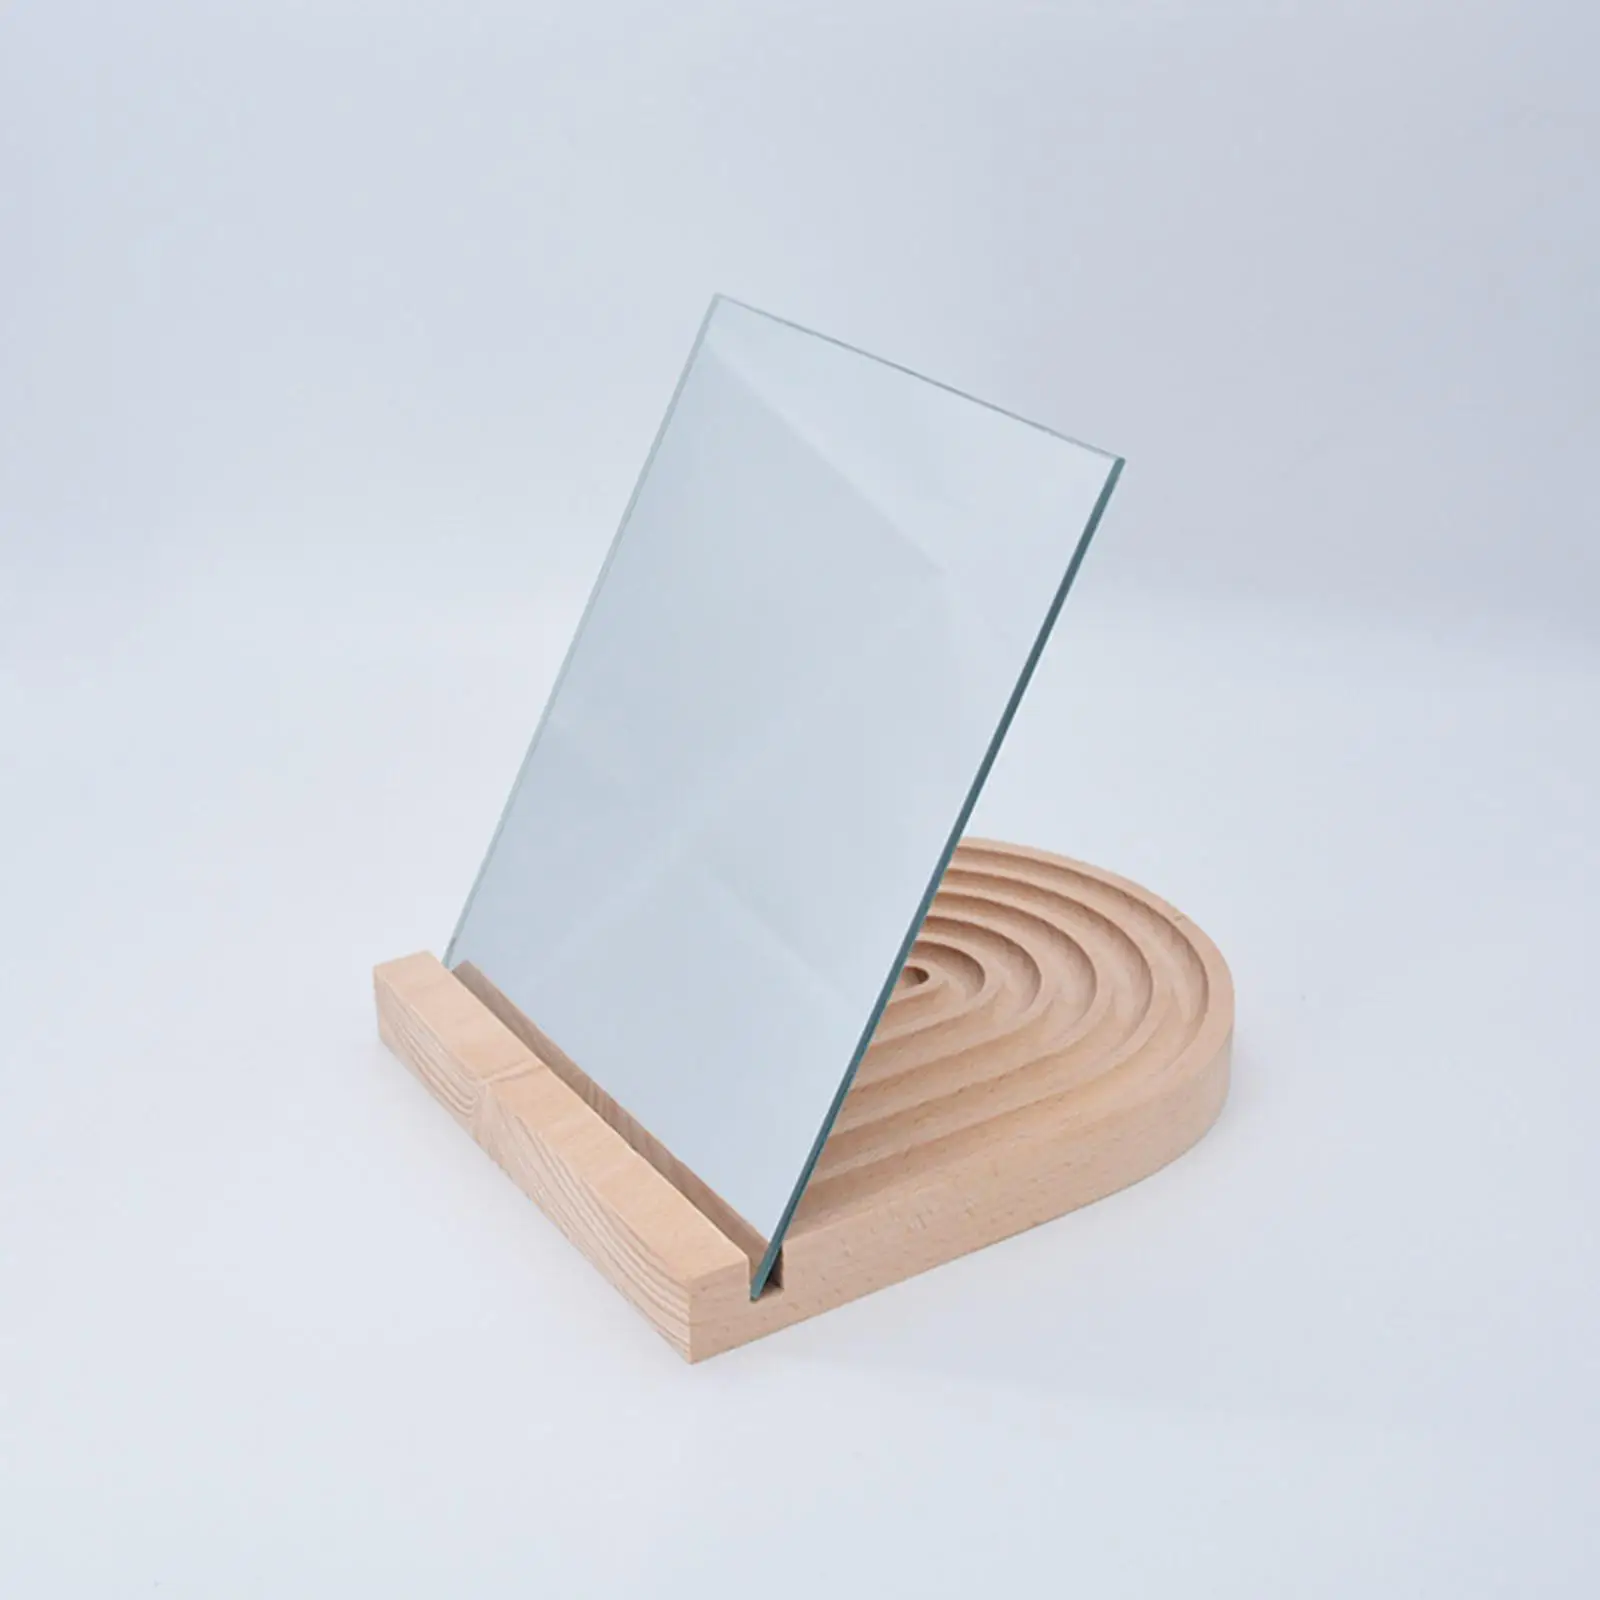 Wooden Ripple Board Plates Multipurpose Bracelets Tray Natural Arch Handmade Mirror Stand for Decoration Bedroom Home